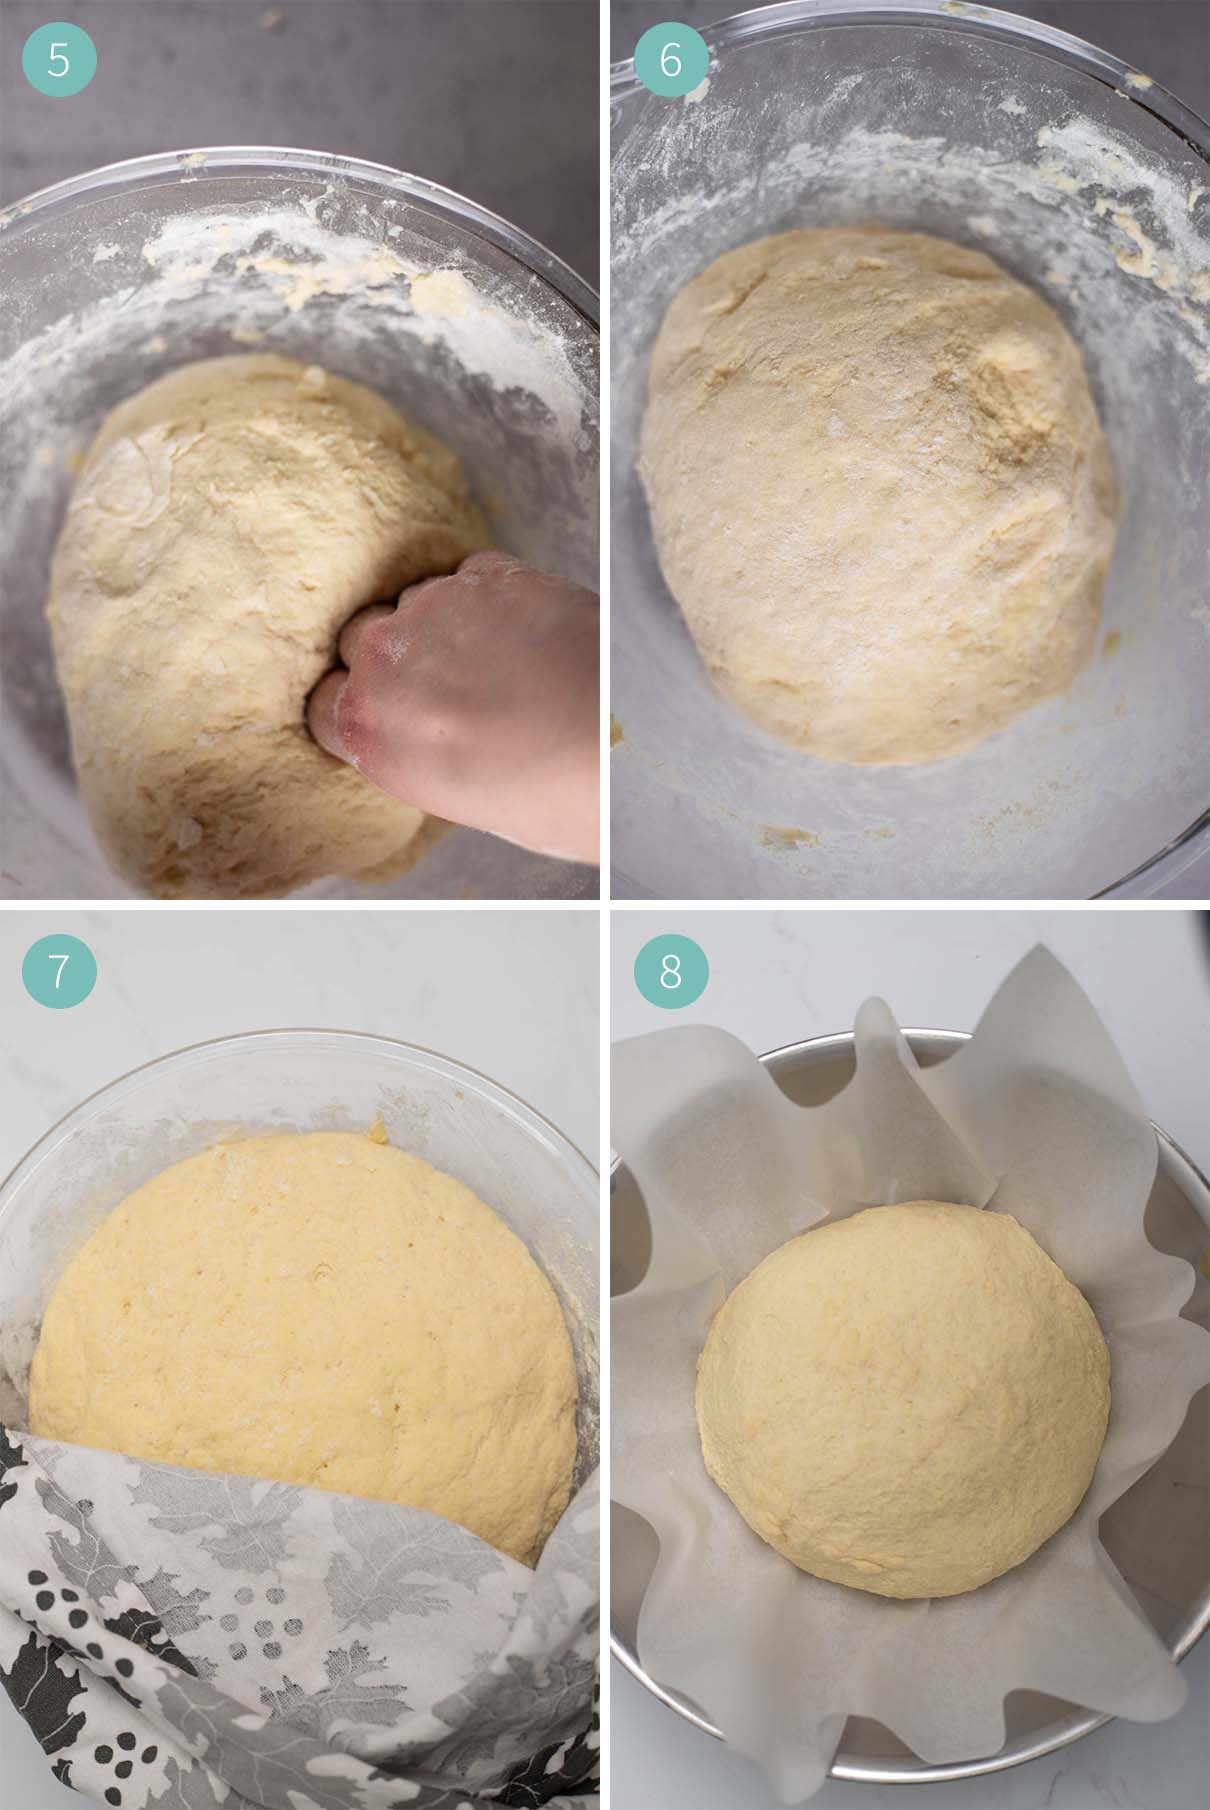 how to make semolina bread - step 5 to 8 in pictures.